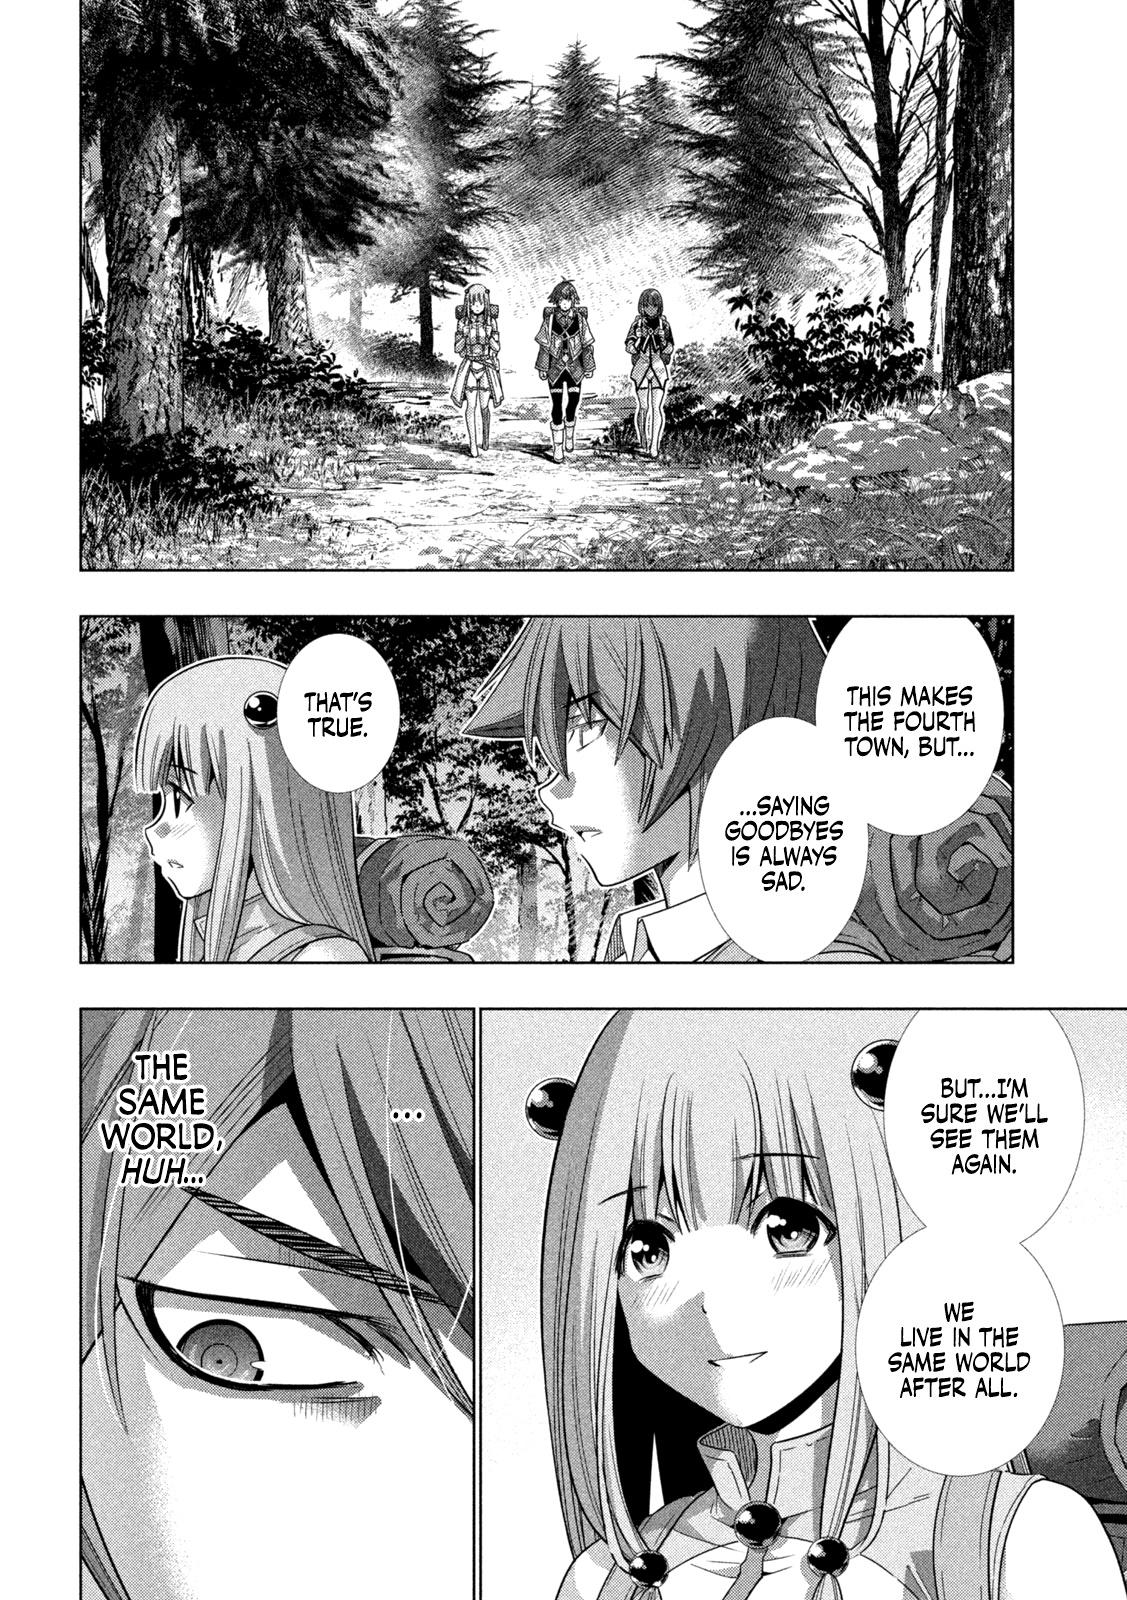 Parallel Paradise Chapter 163: At First Glance, An Isolated . . . House? page 17 - Mangakakalot